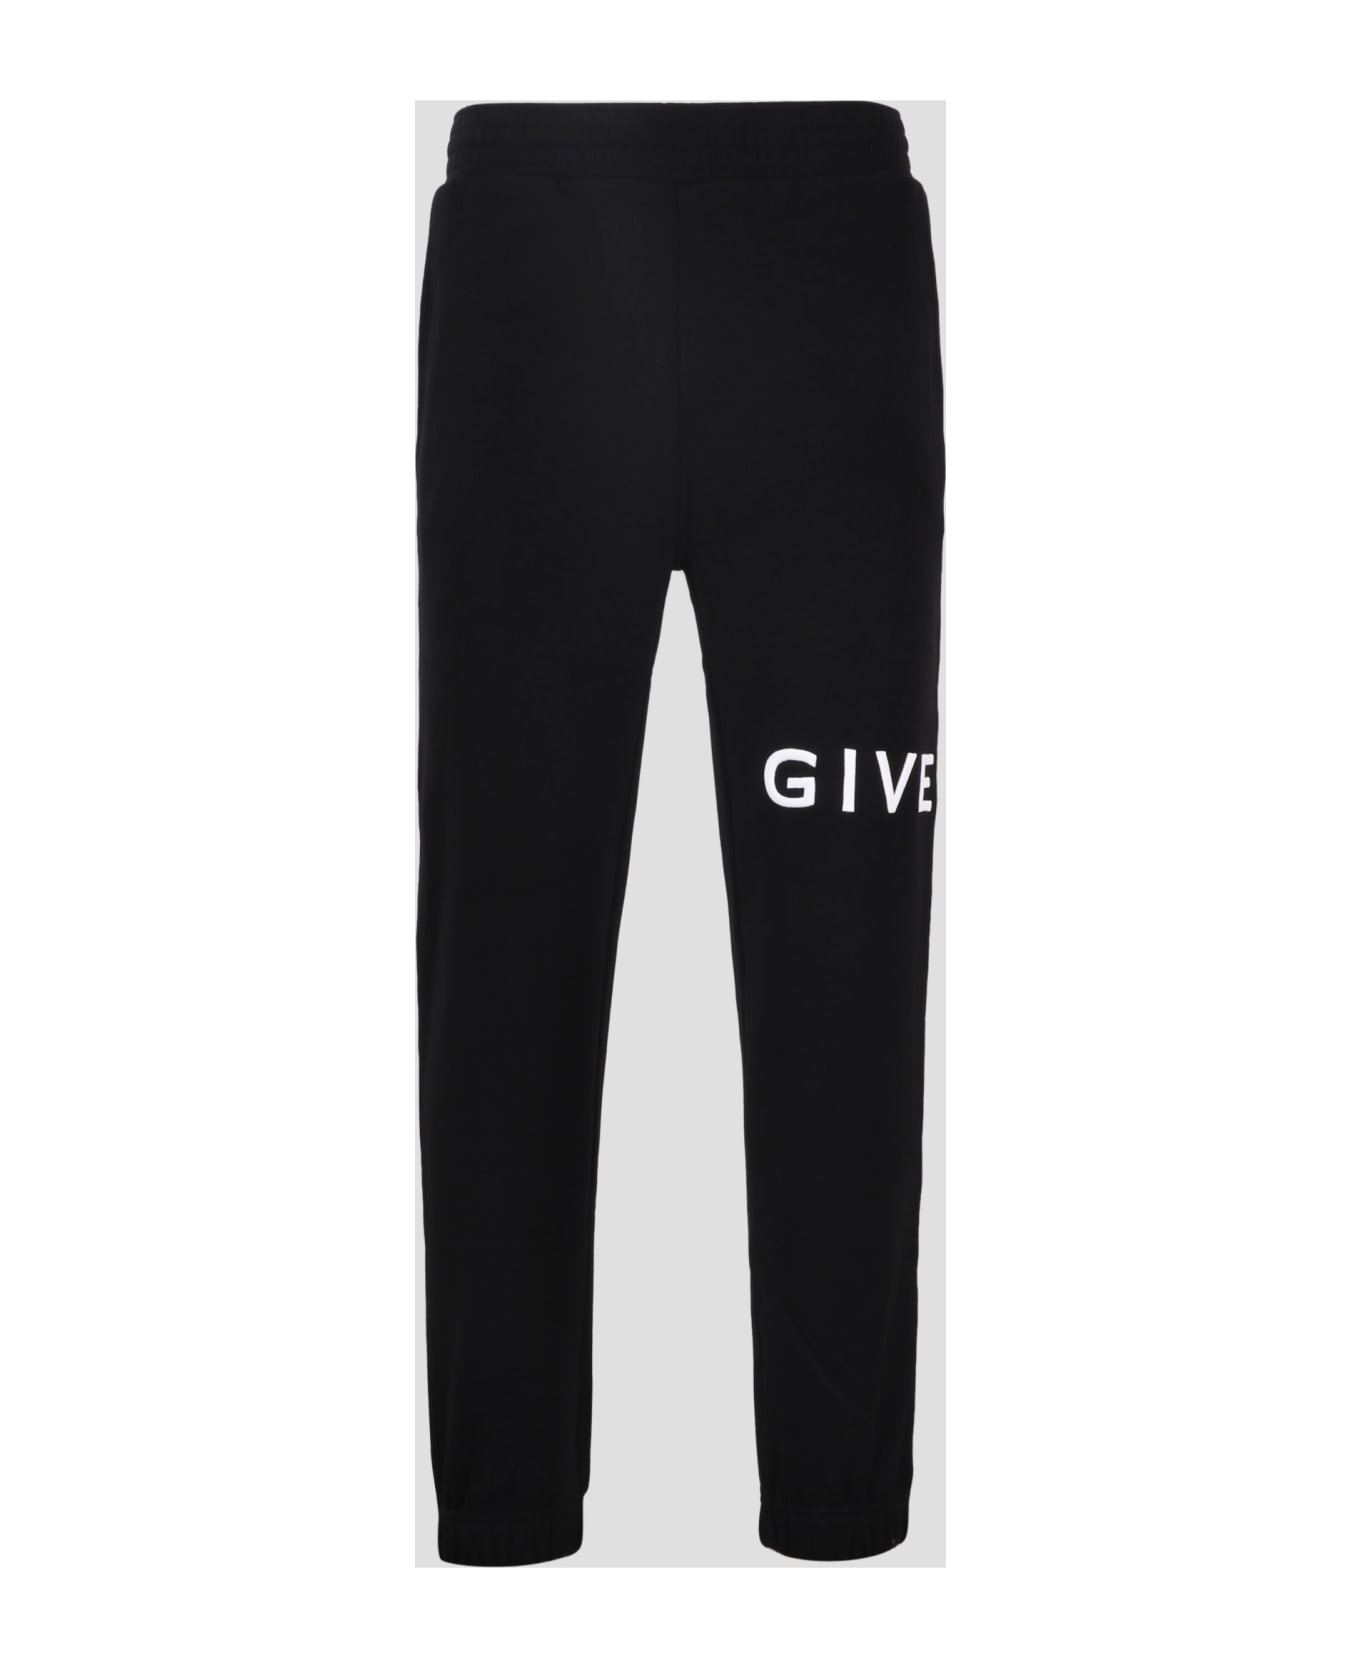 Givenchy Fleece Trousers - Black